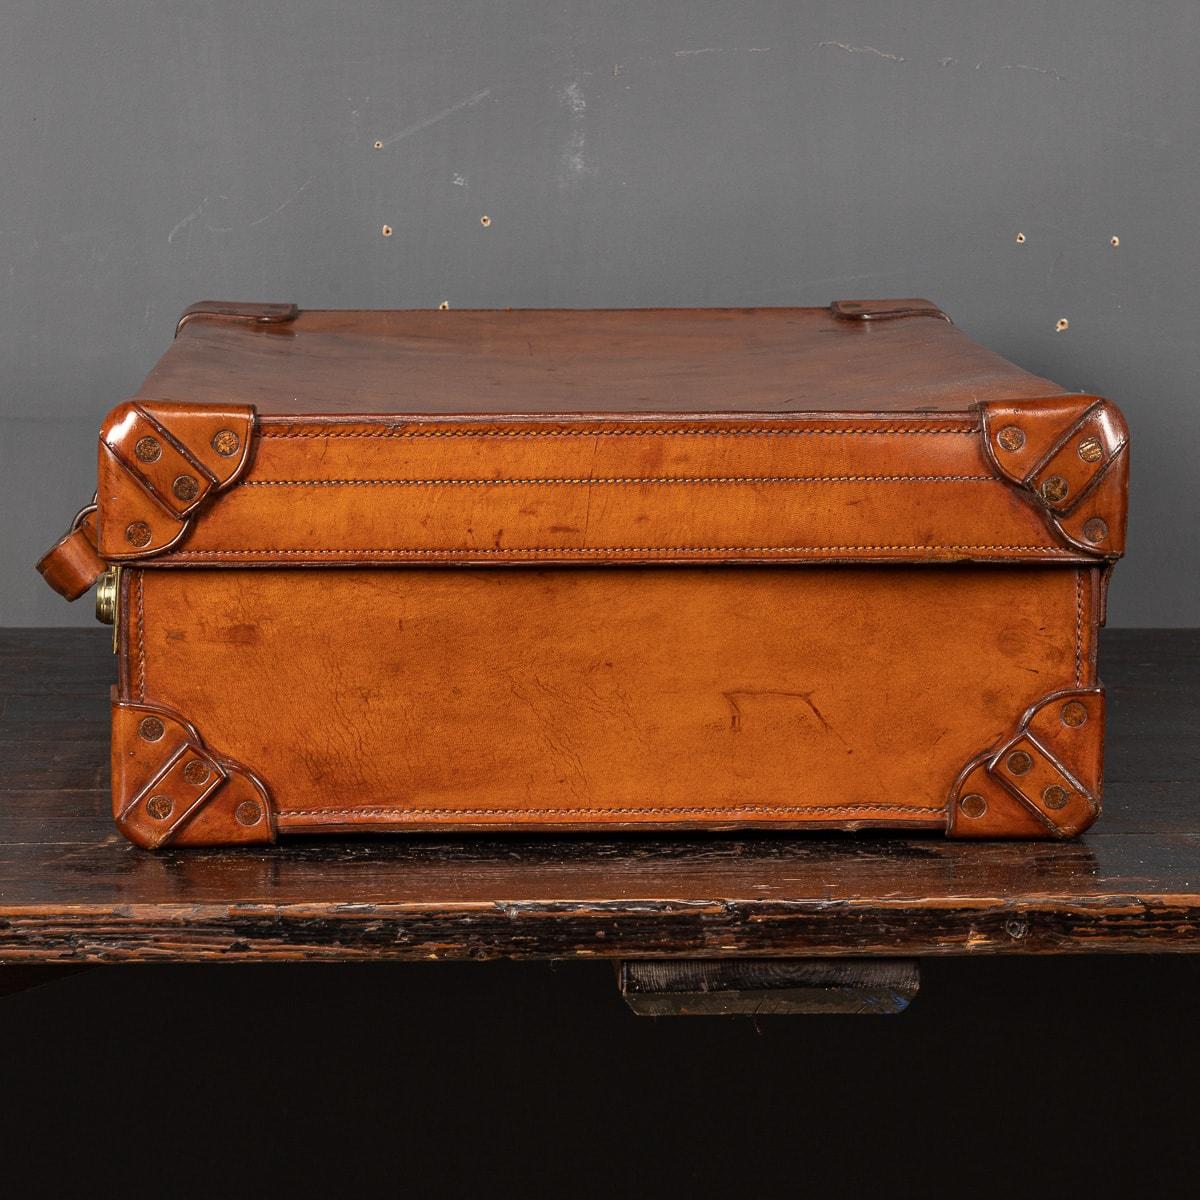 British An Edwardian Dressing Case With Silver Accessories By Walker & Hall c.1928 For Sale